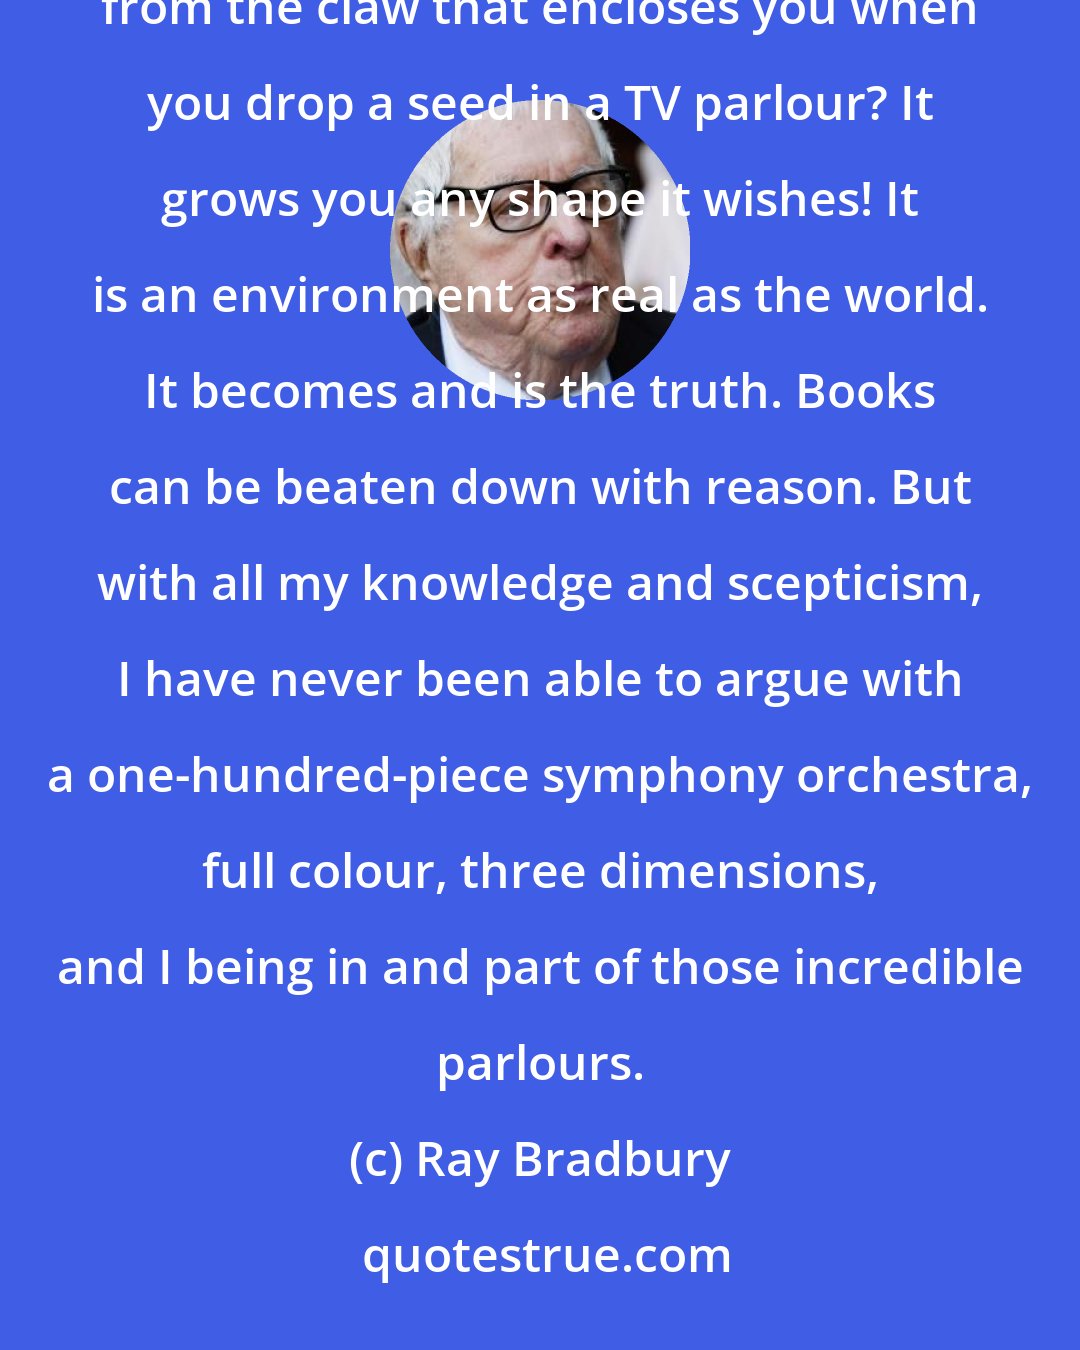 Ray Bradbury: Thank God for that. You can shut them, say, 'Hold on a moment.' You play God to it. But who has ever torn himself from the claw that encloses you when you drop a seed in a TV parlour? It grows you any shape it wishes! It is an environment as real as the world. It becomes and is the truth. Books can be beaten down with reason. But with all my knowledge and scepticism, I have never been able to argue with a one-hundred-piece symphony orchestra, full colour, three dimensions, and I being in and part of those incredible parlours.